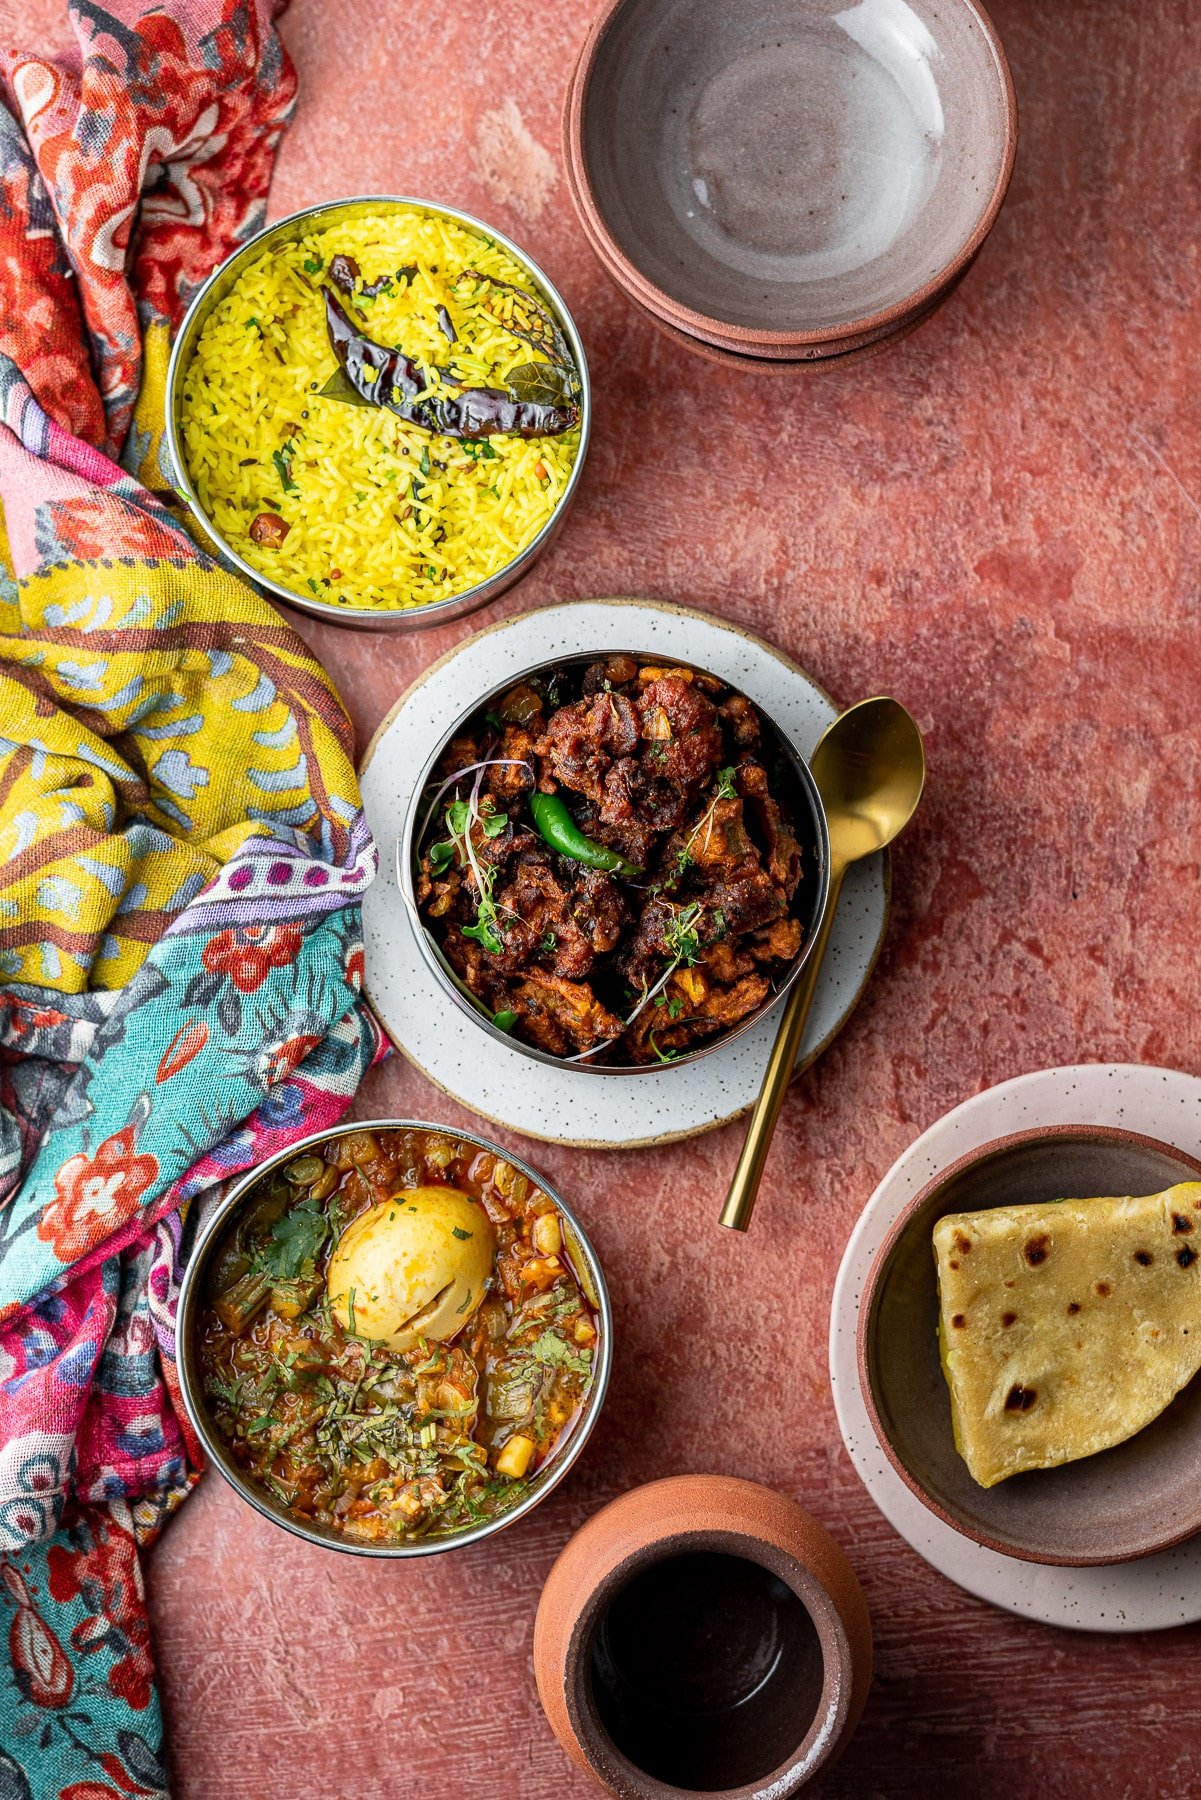 a spread of indian food with rice, roti, chicken, and egg curry